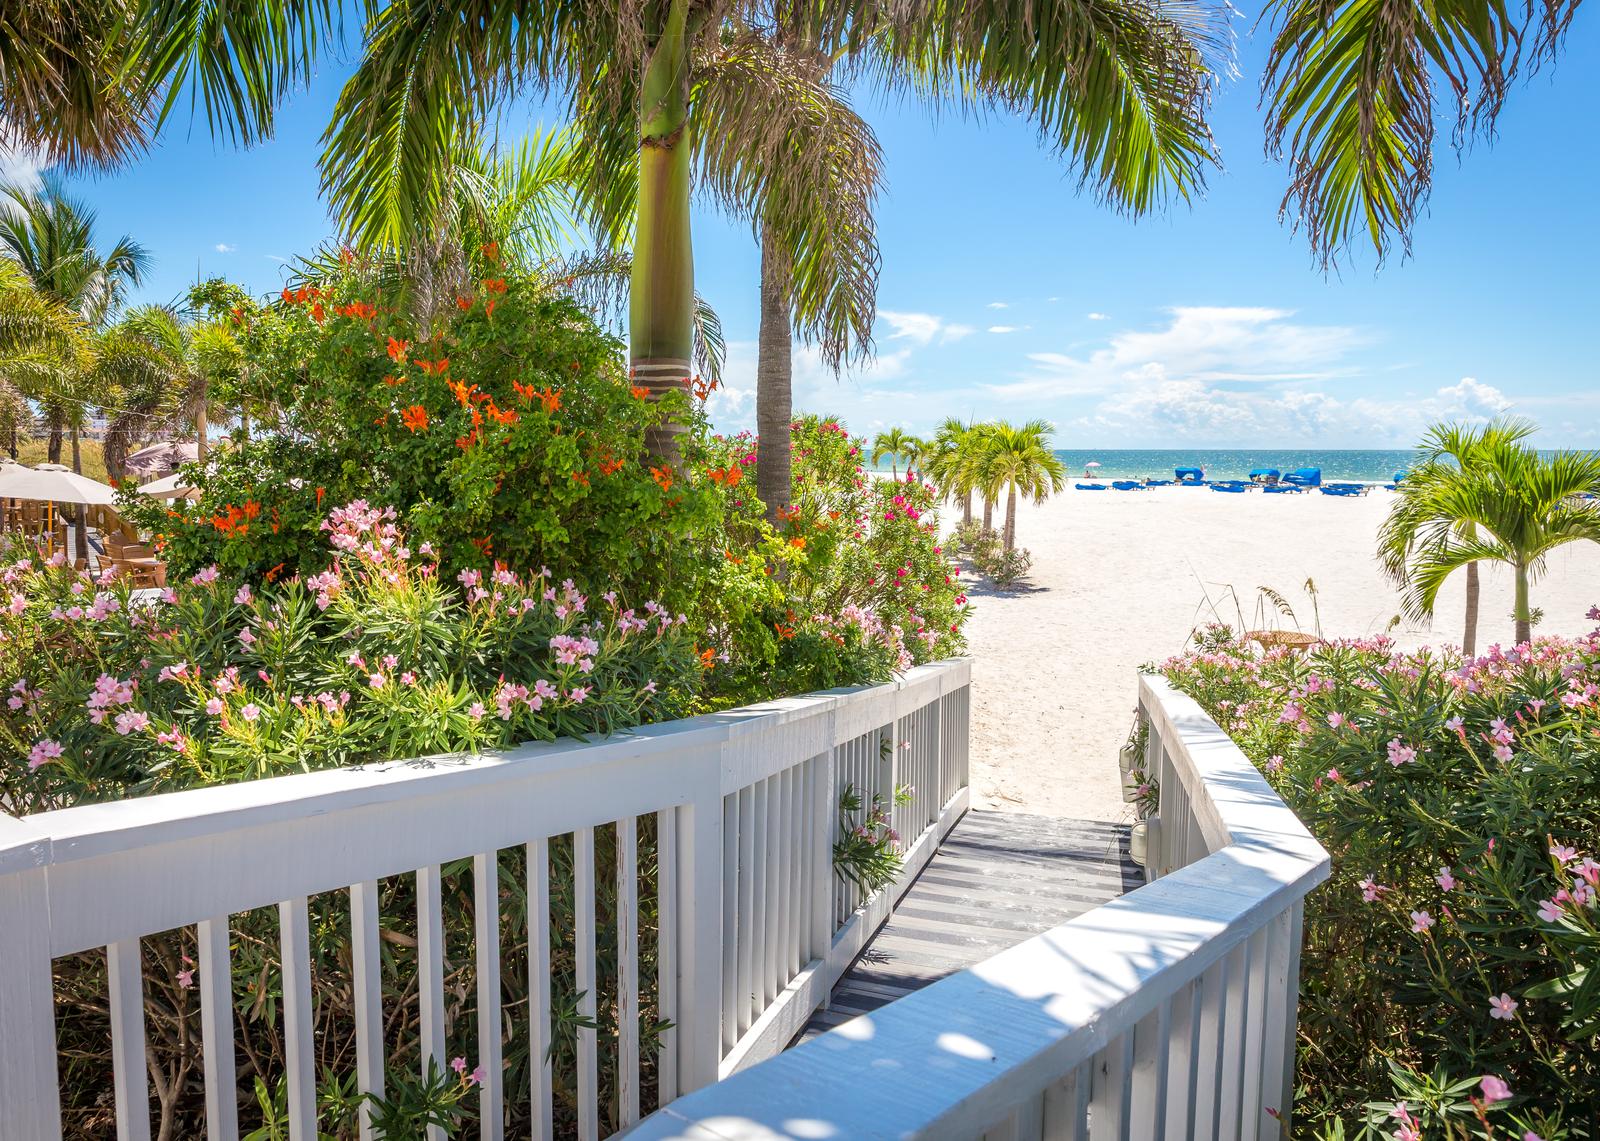 Walkway to the St. Pete Beach with tropical greenery and white sands on the Gulf Coast.